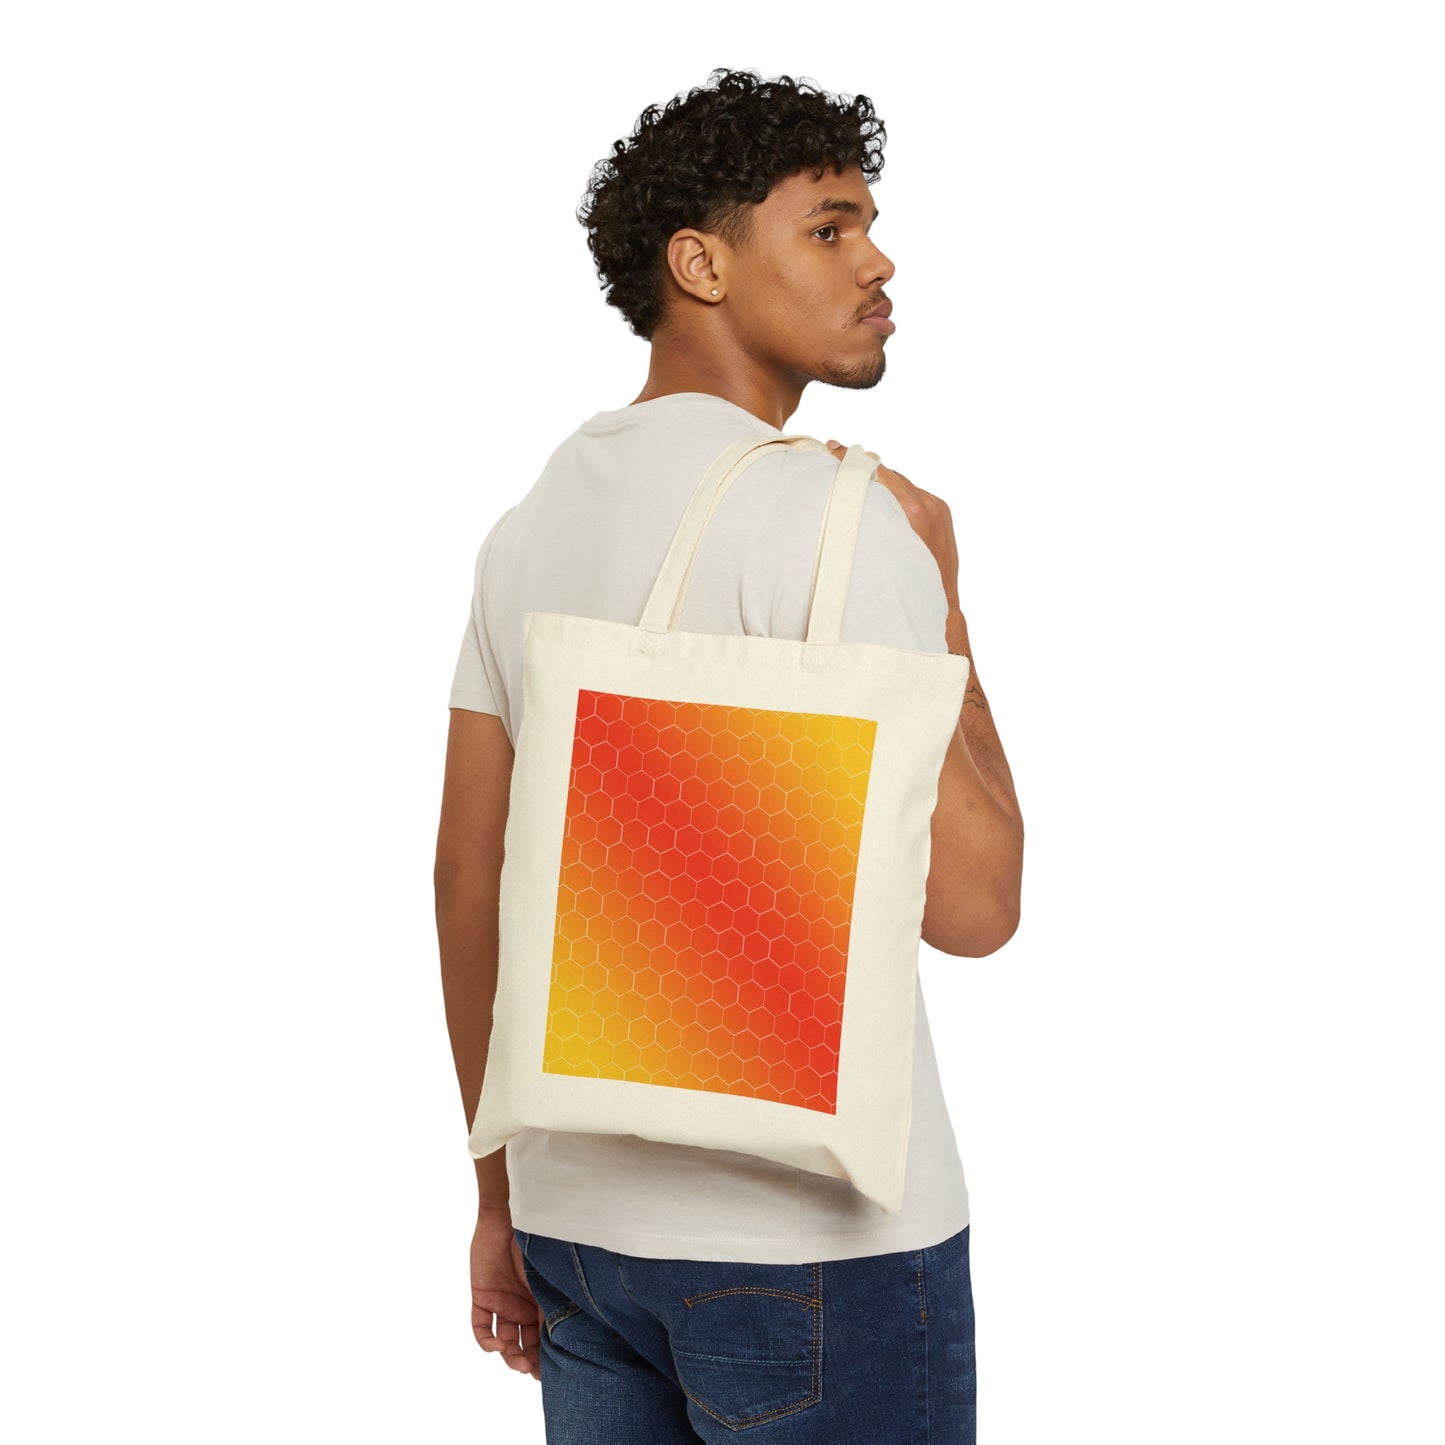 Bee  Honeycomb Honey  Nature Lovers Canvas Shopping Cotton Tote Bag